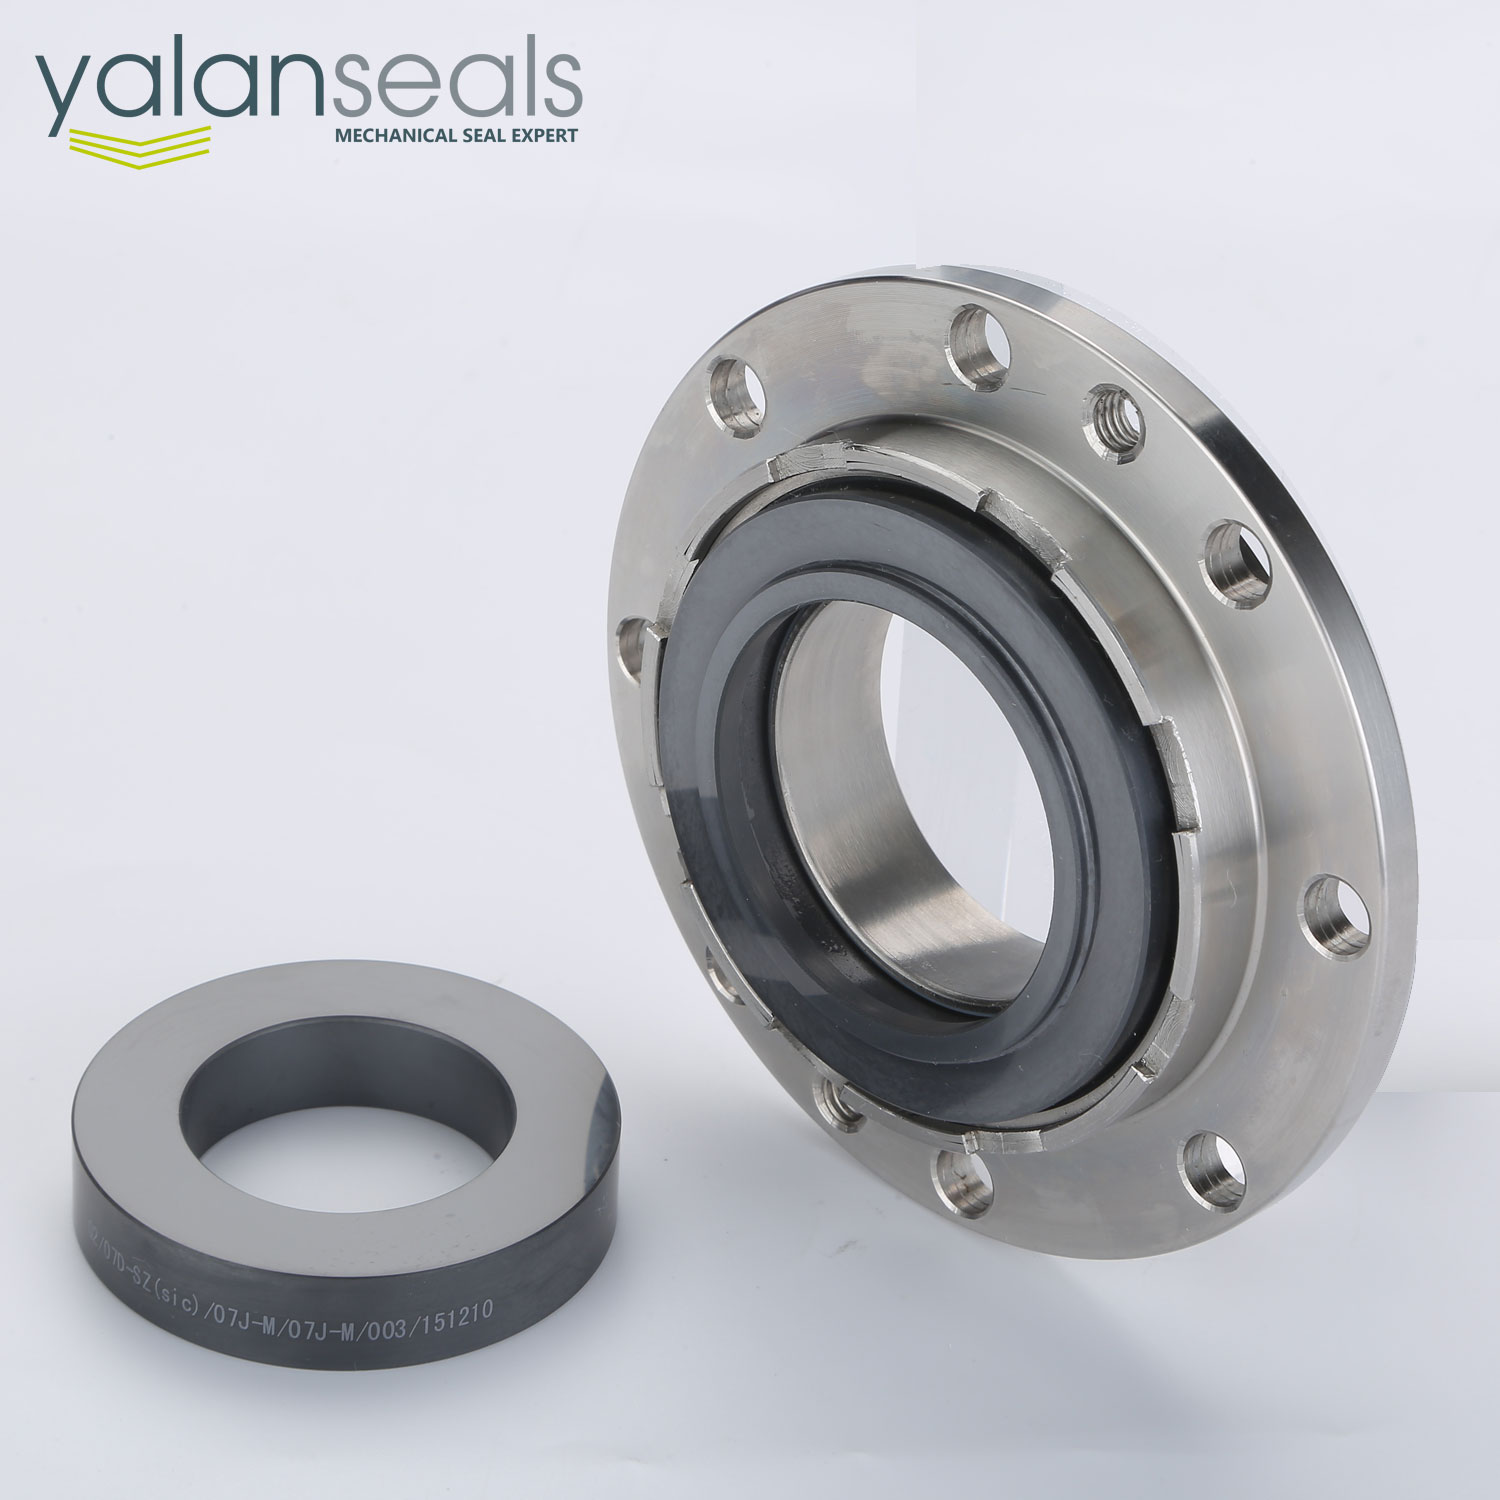 07J-07D Double Mechanical Seal for Roots Blowers, High Speed Pumps and Gearboxes